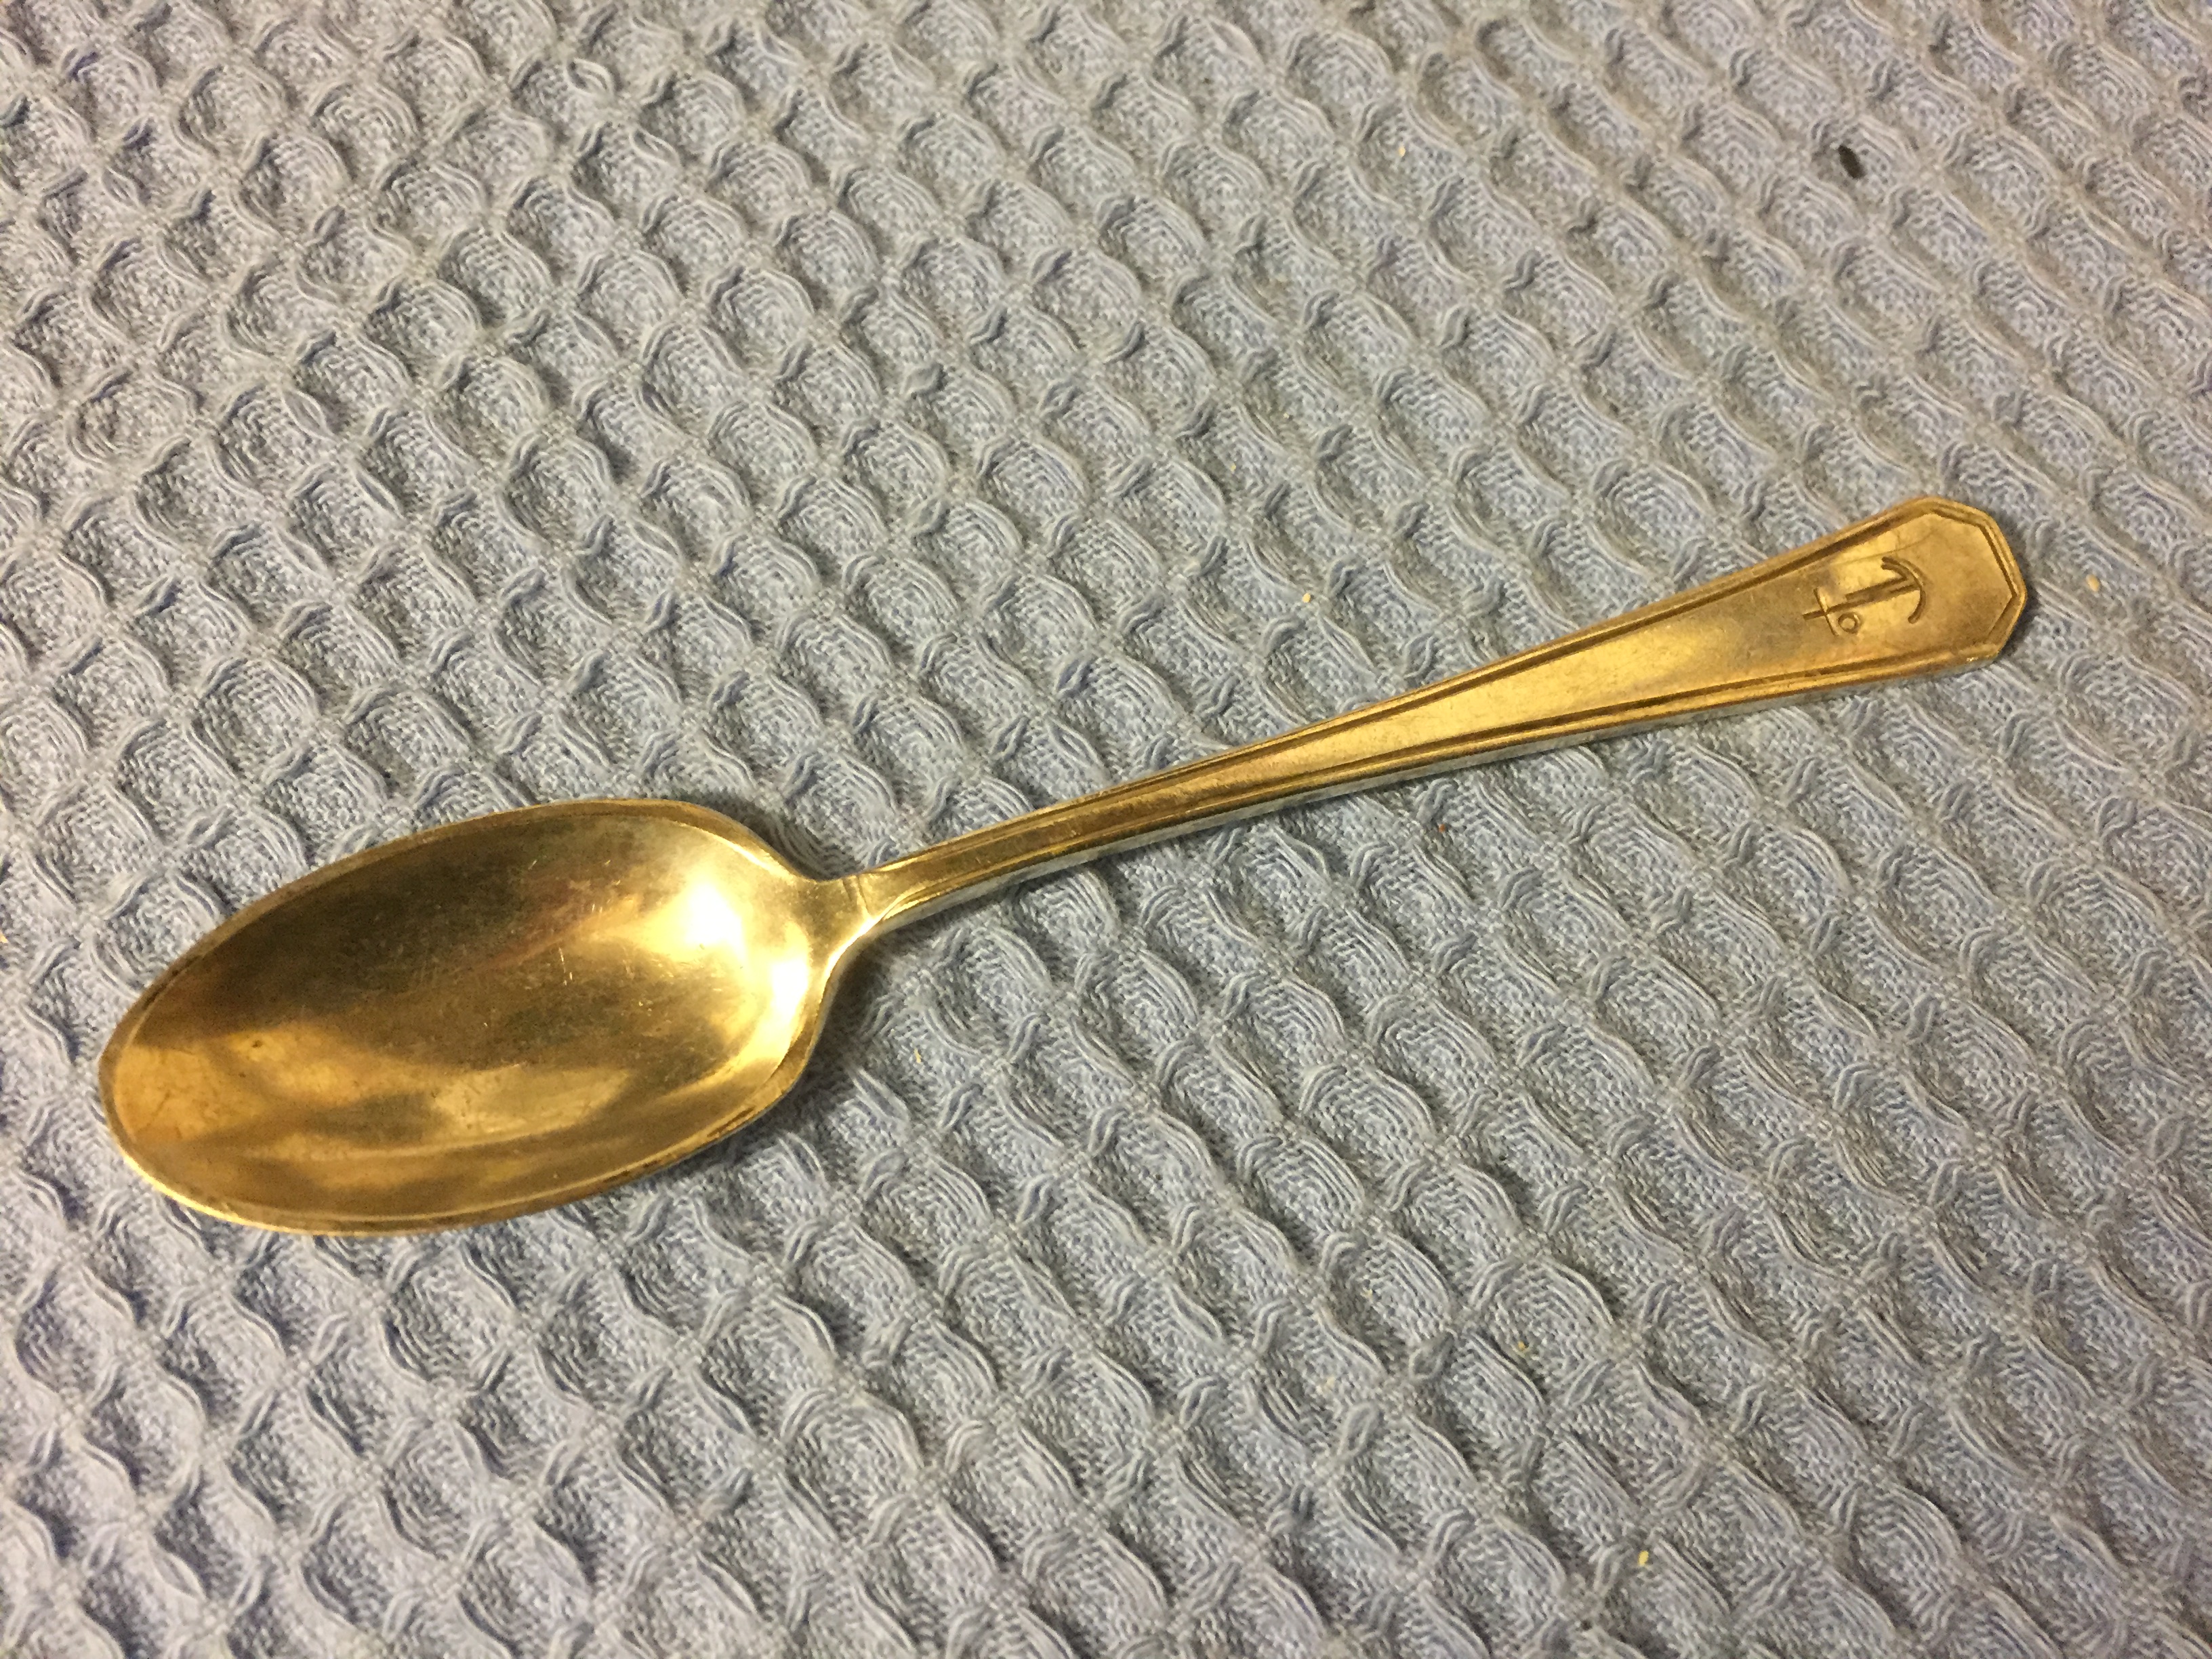 AS USED ON BOARD TEA SPOON FROM THE ORIENT LINE